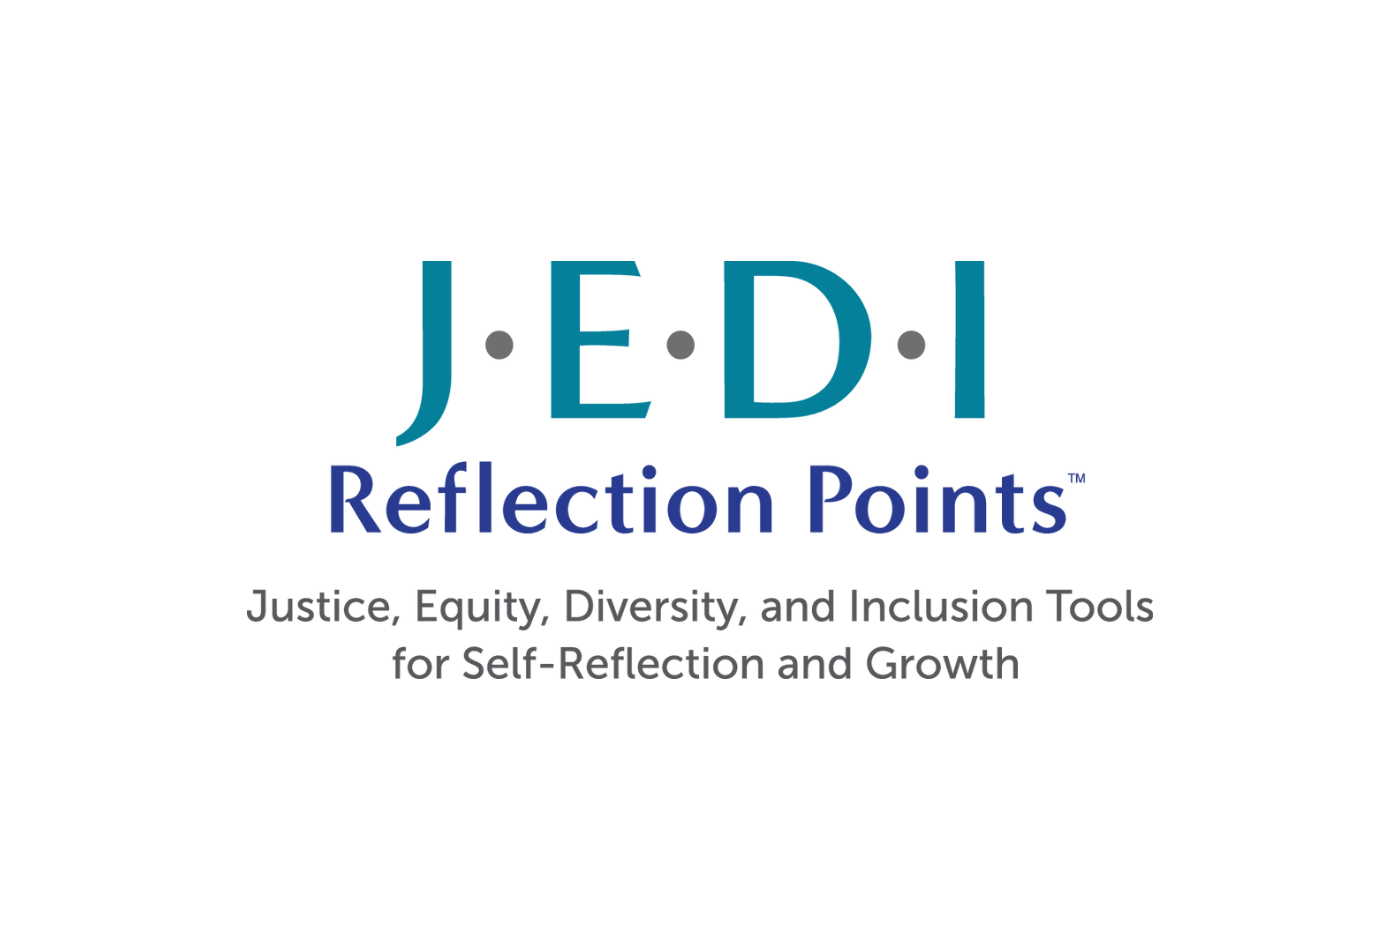 JEDI Reflection Points logo; Justice, Equity, Diversity, and Inclusion Tools for Self-Reflection and Growth